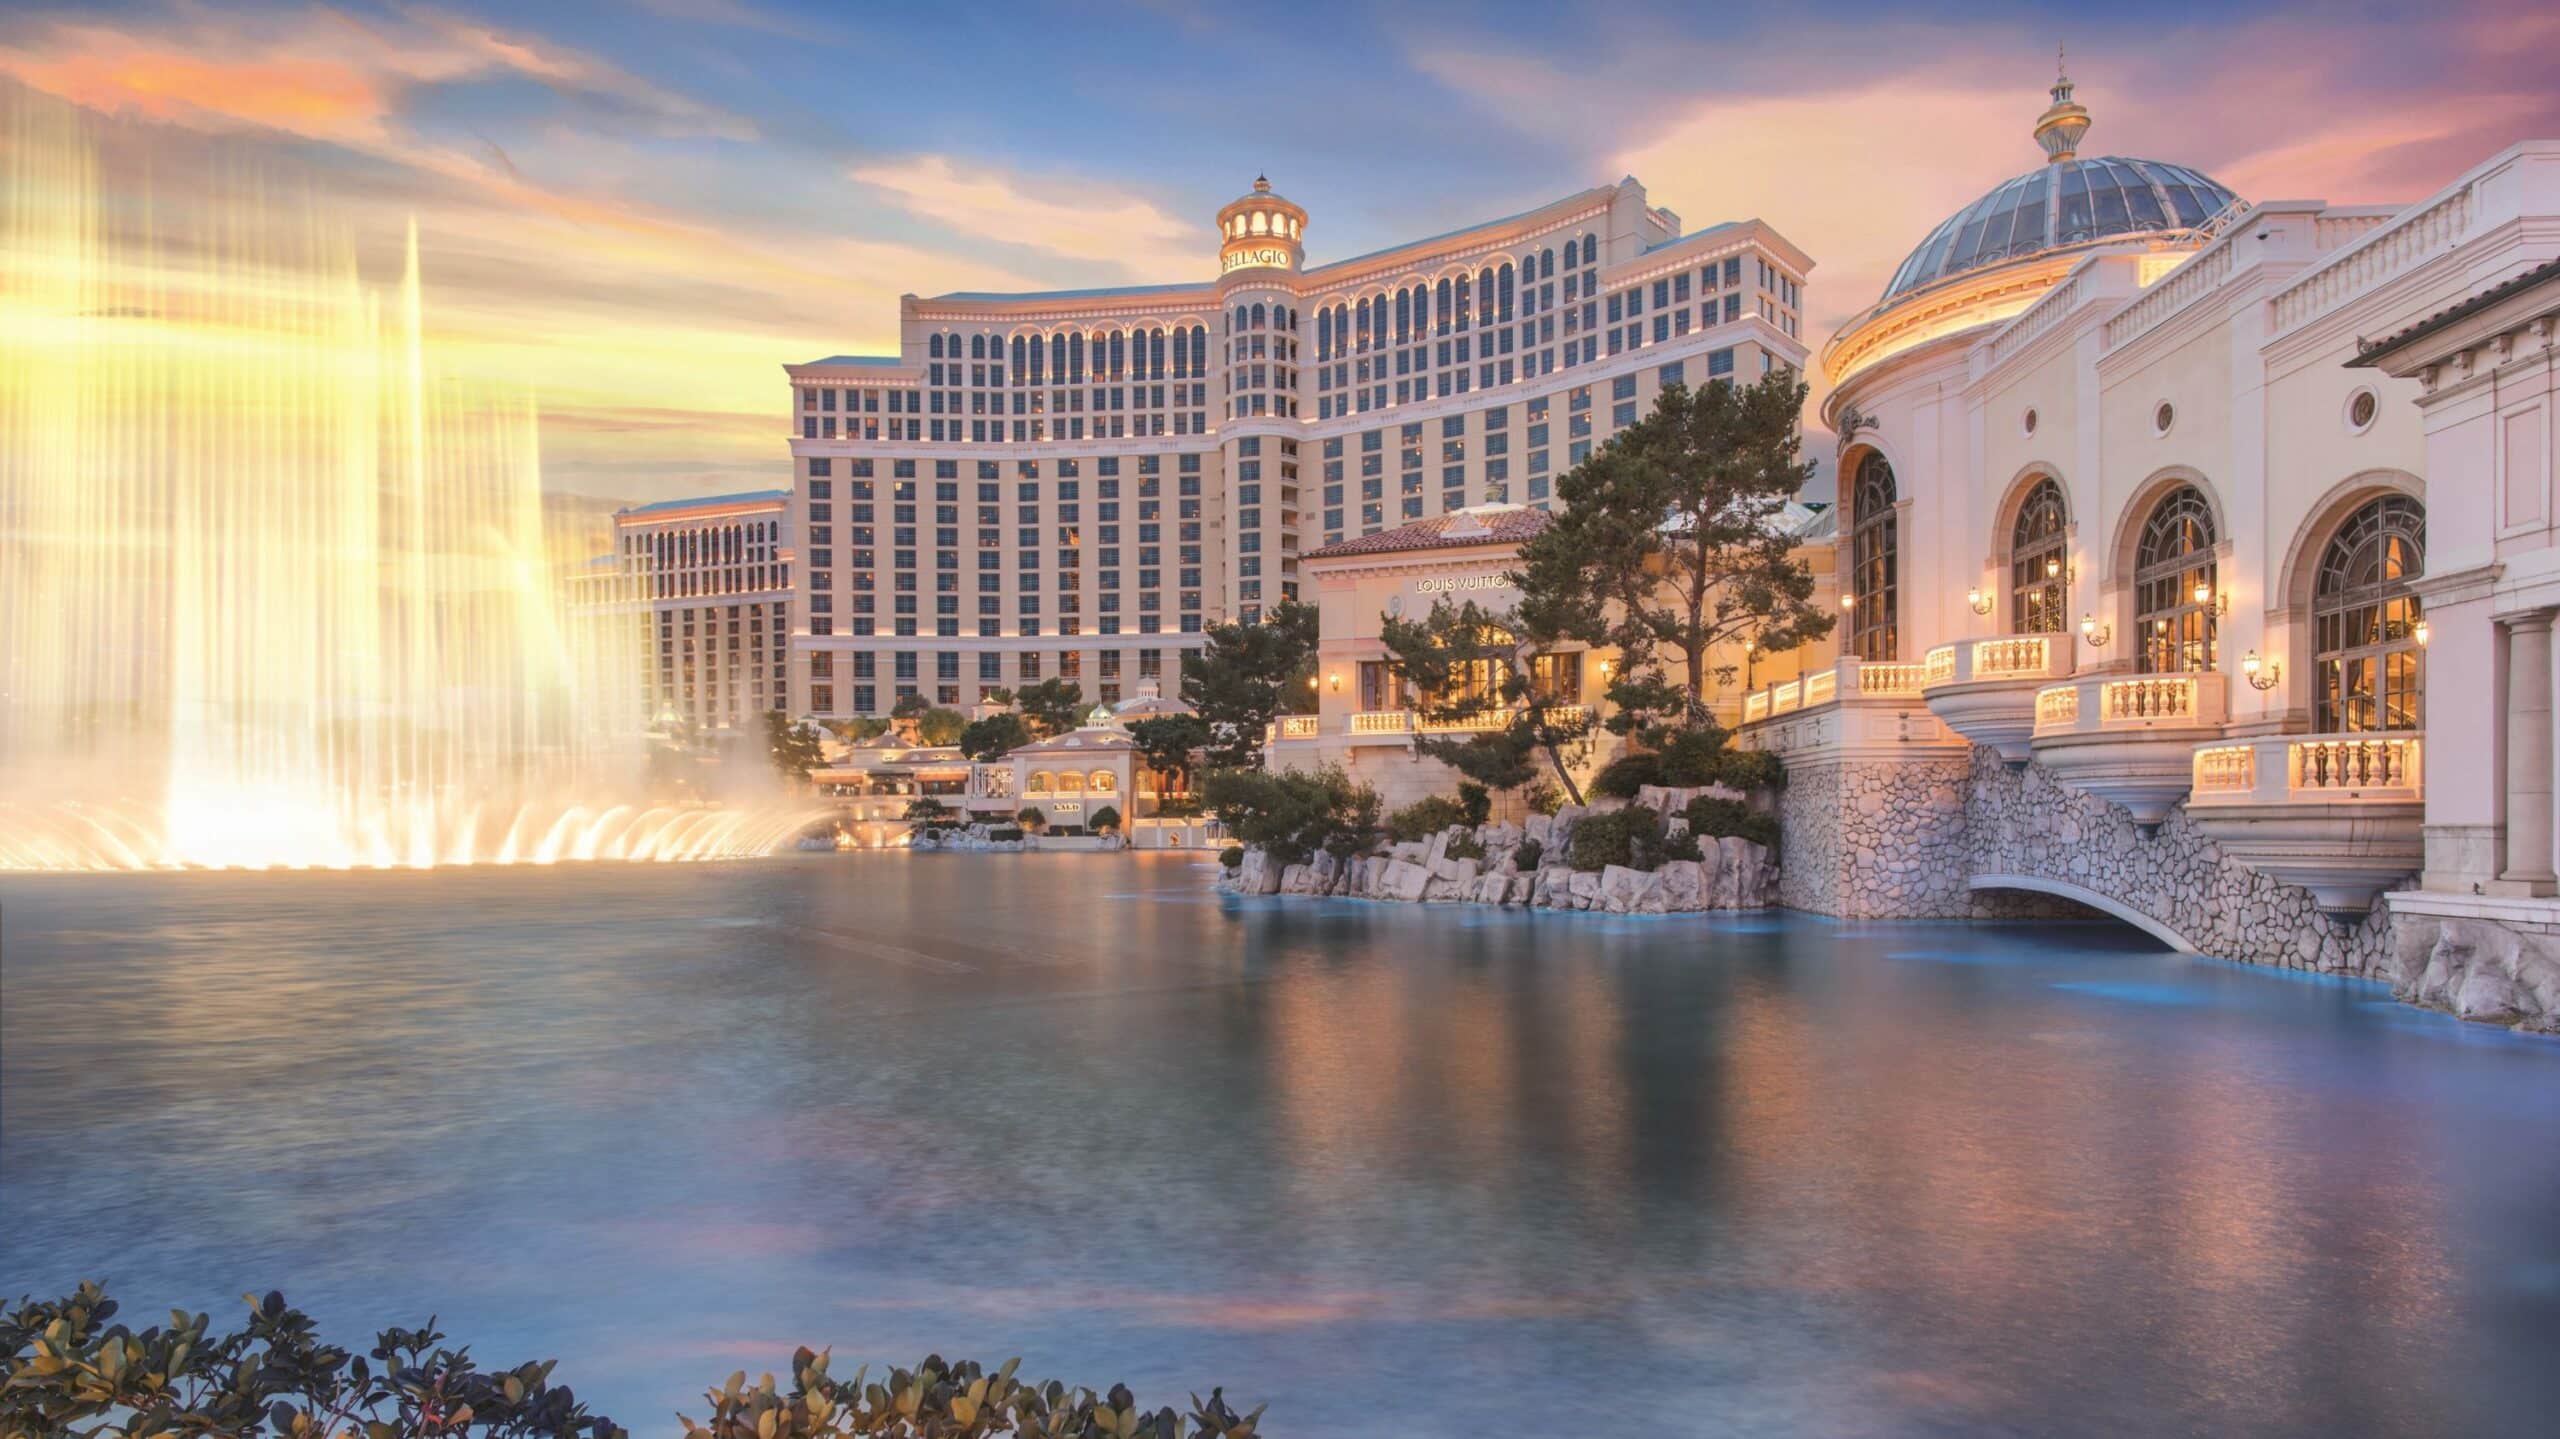 Sunset photo of the Bellagio Fountain show in Las Vegas